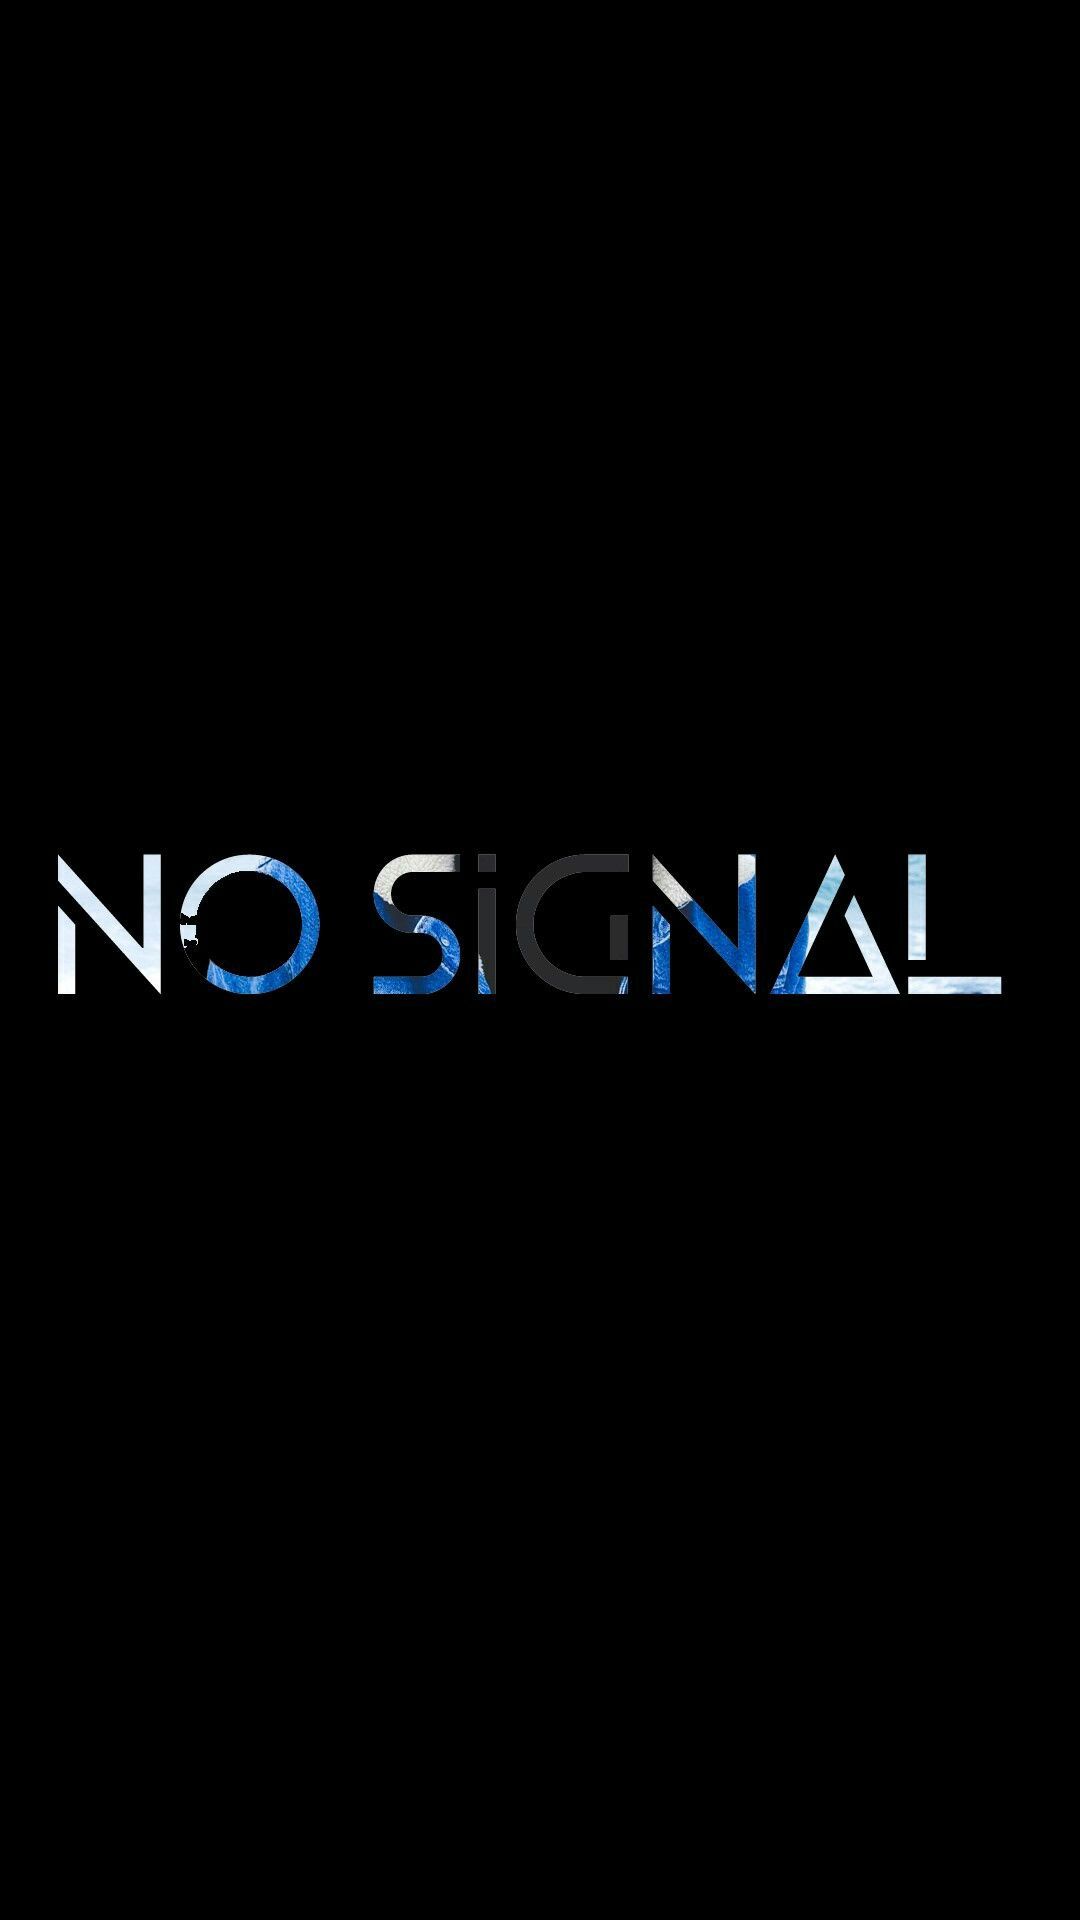 NO SIGNAL WALLPAPER. Wallpaper, Logos, Projects to try